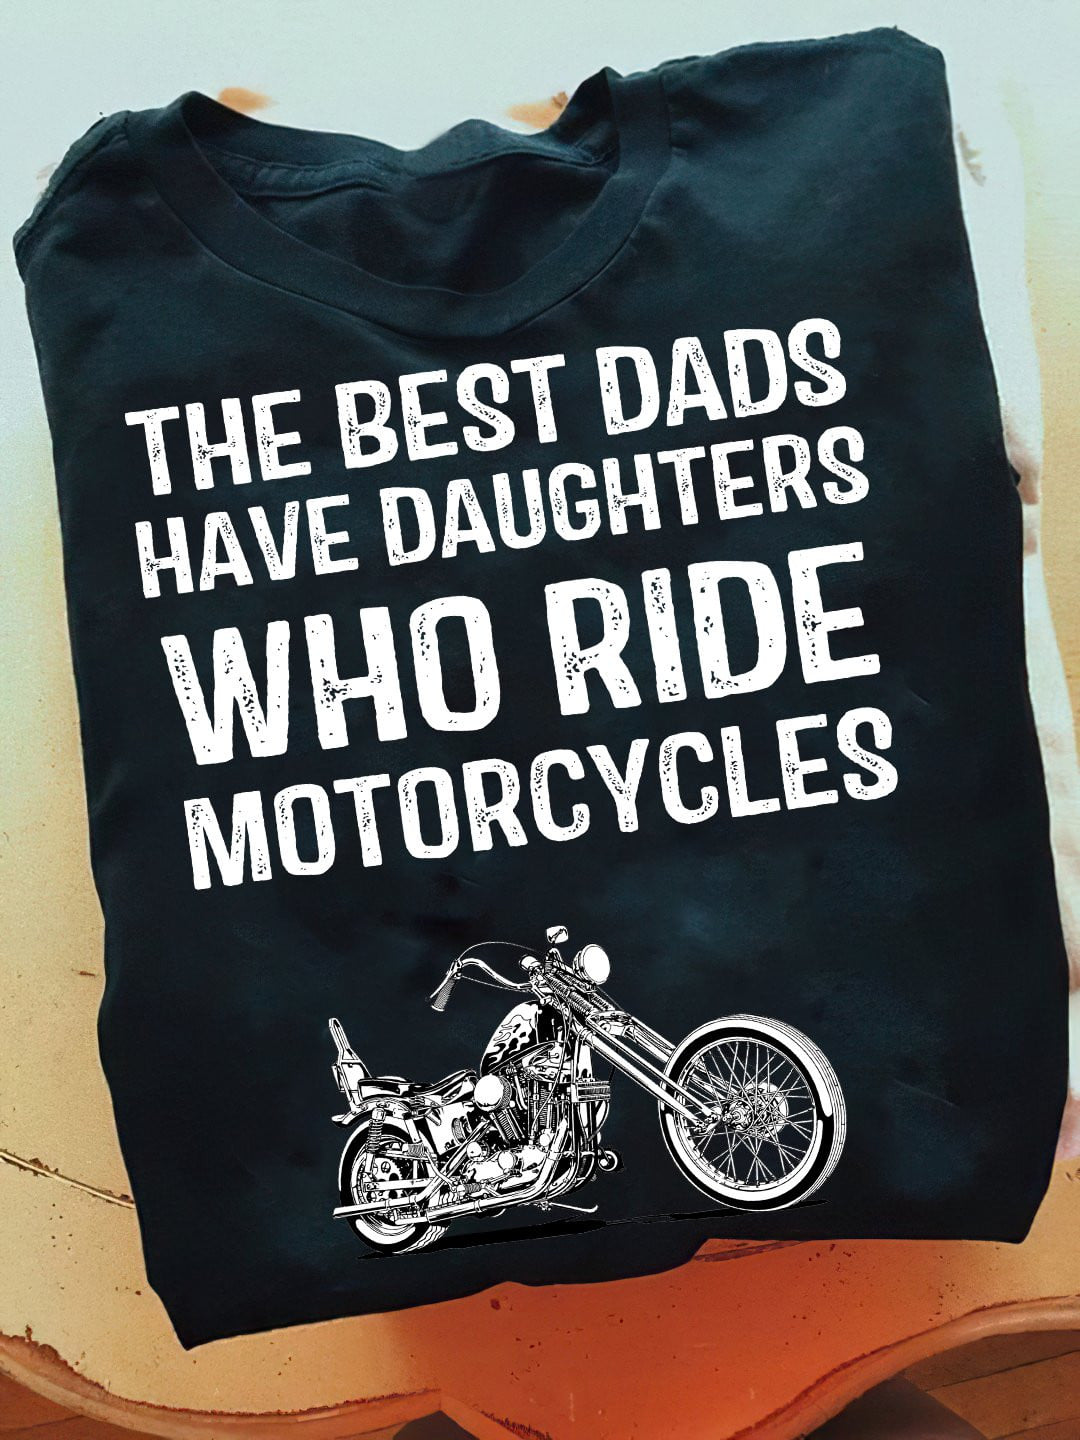 The best dads have daughters who ride motorcycles - Father's day gift